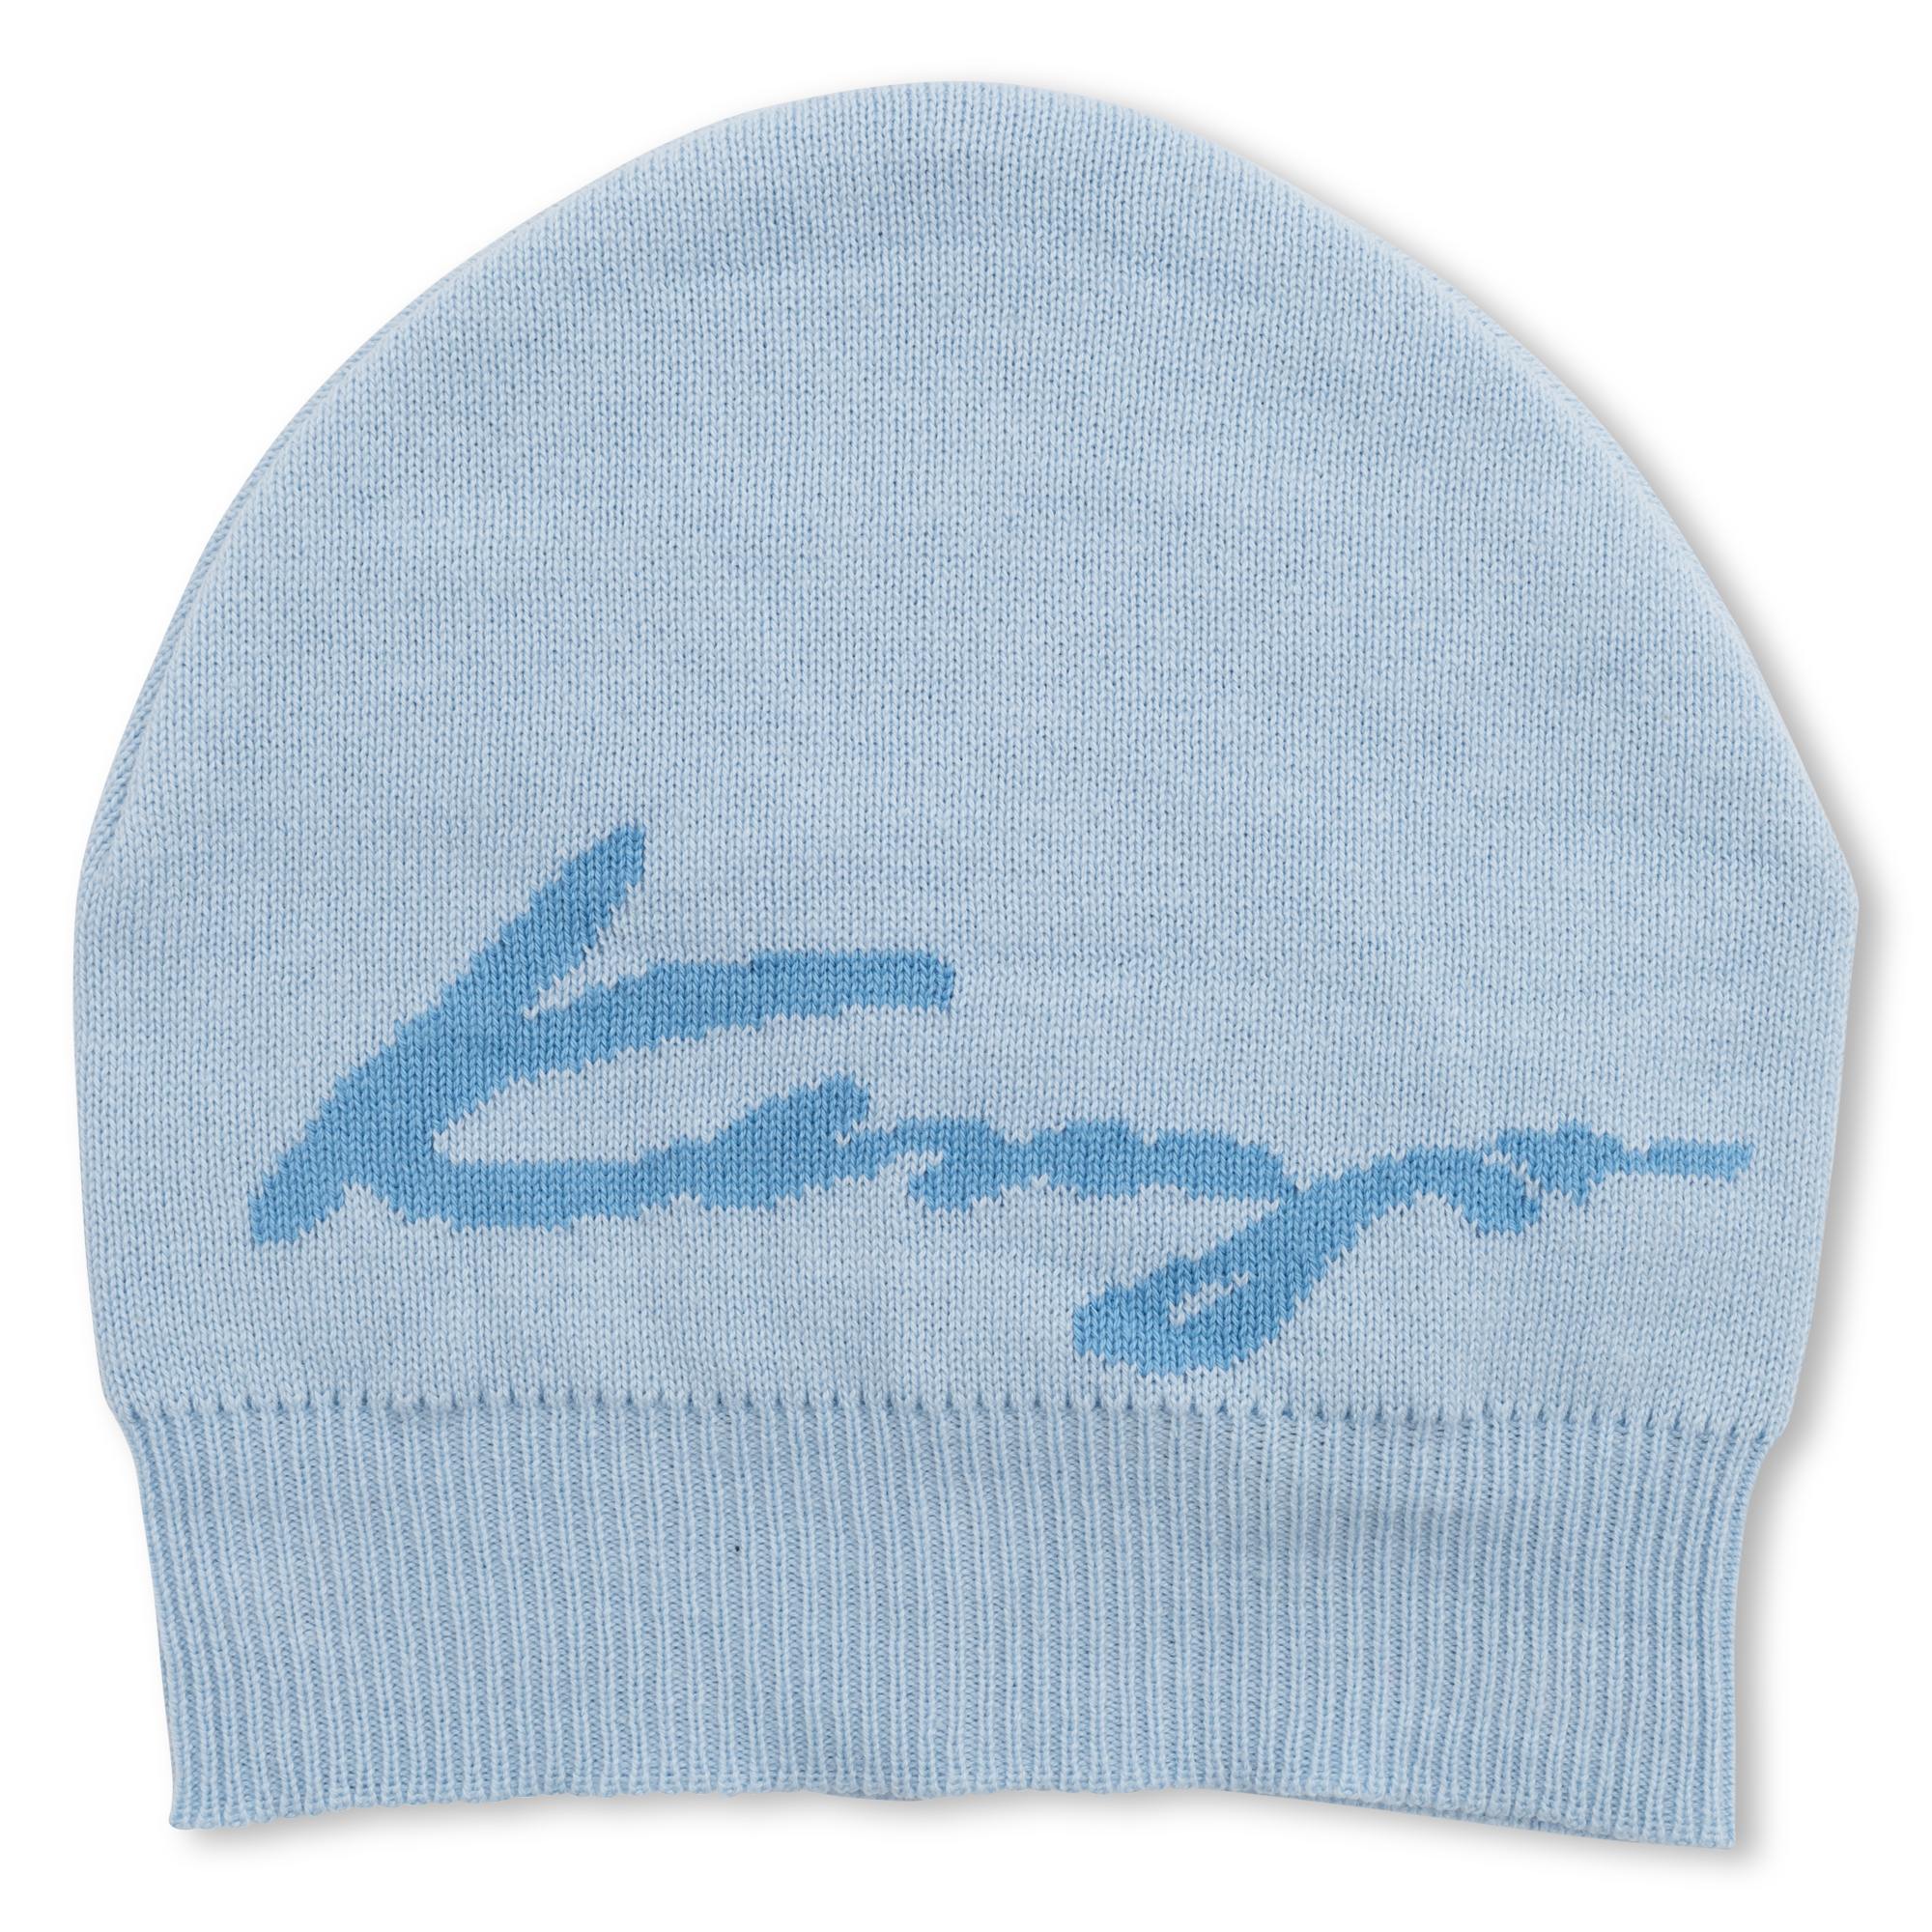 Knitted cotton cap KENZO KIDS for UNISEX